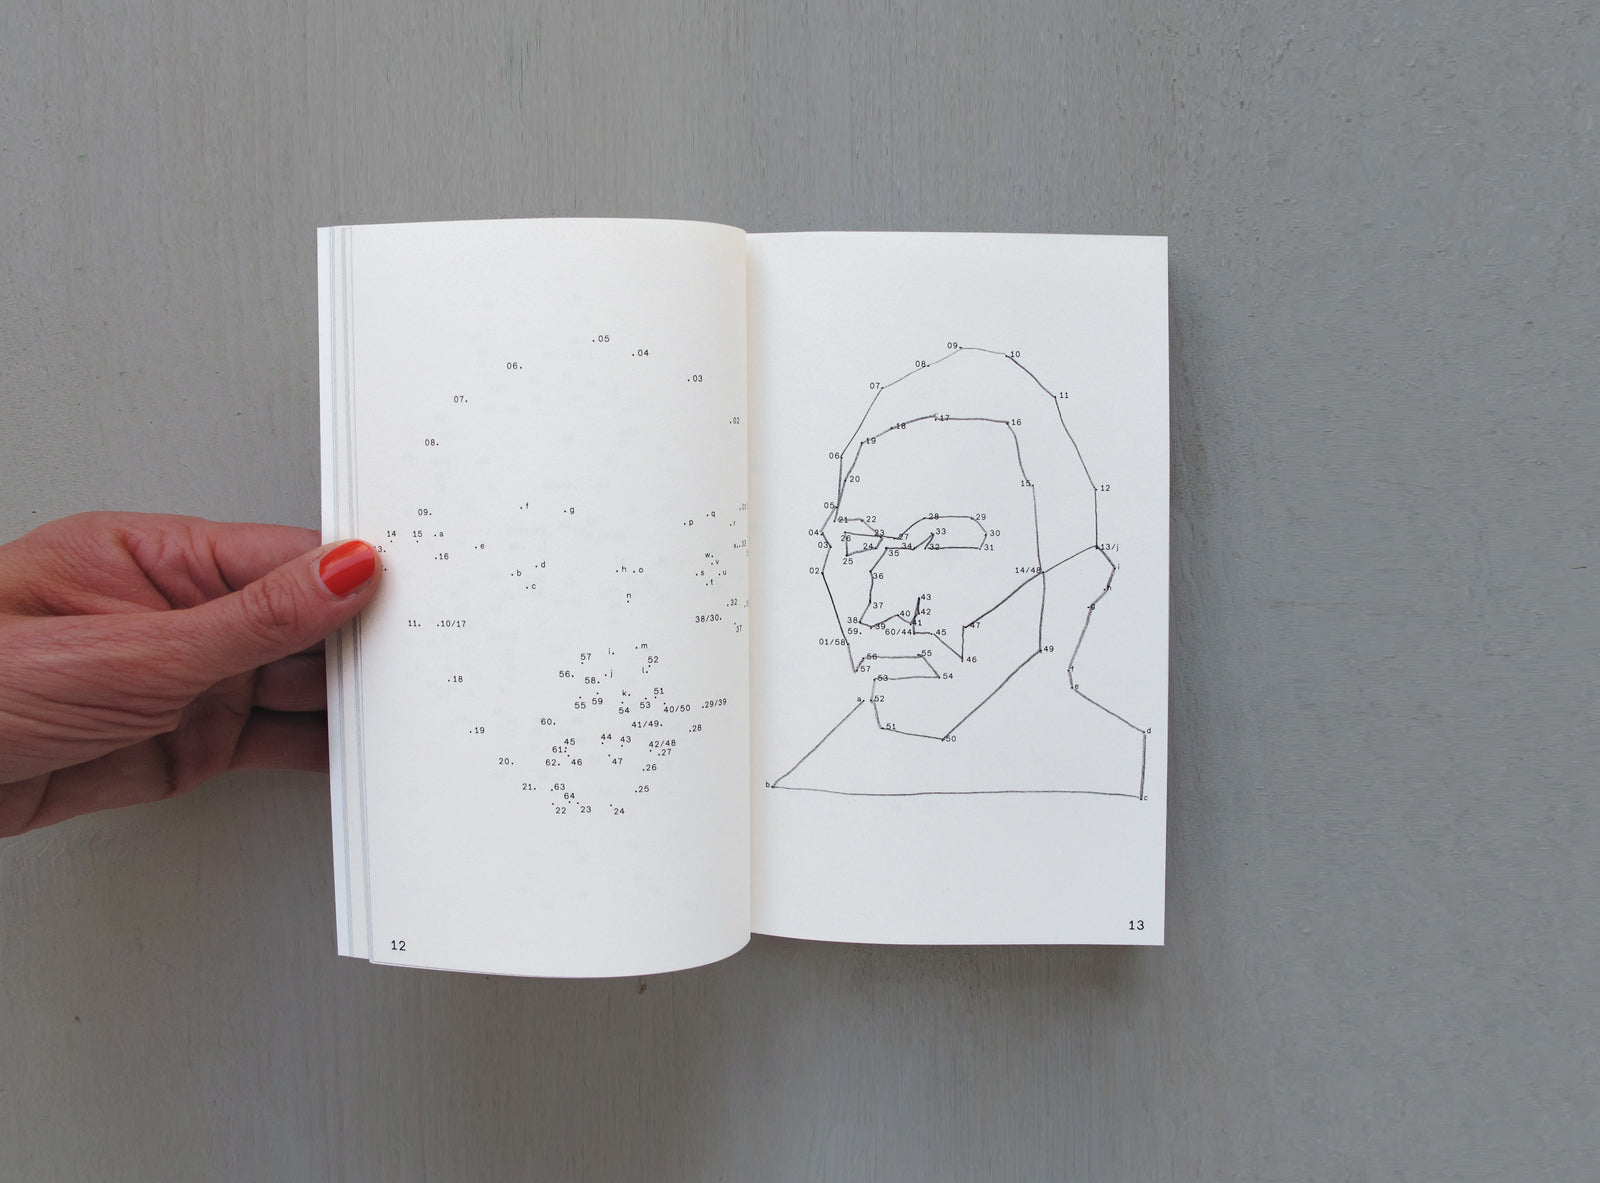 Spread from our Connect the Dots and Become the Artist book with the right image with dots all connected and the left one sill blank.